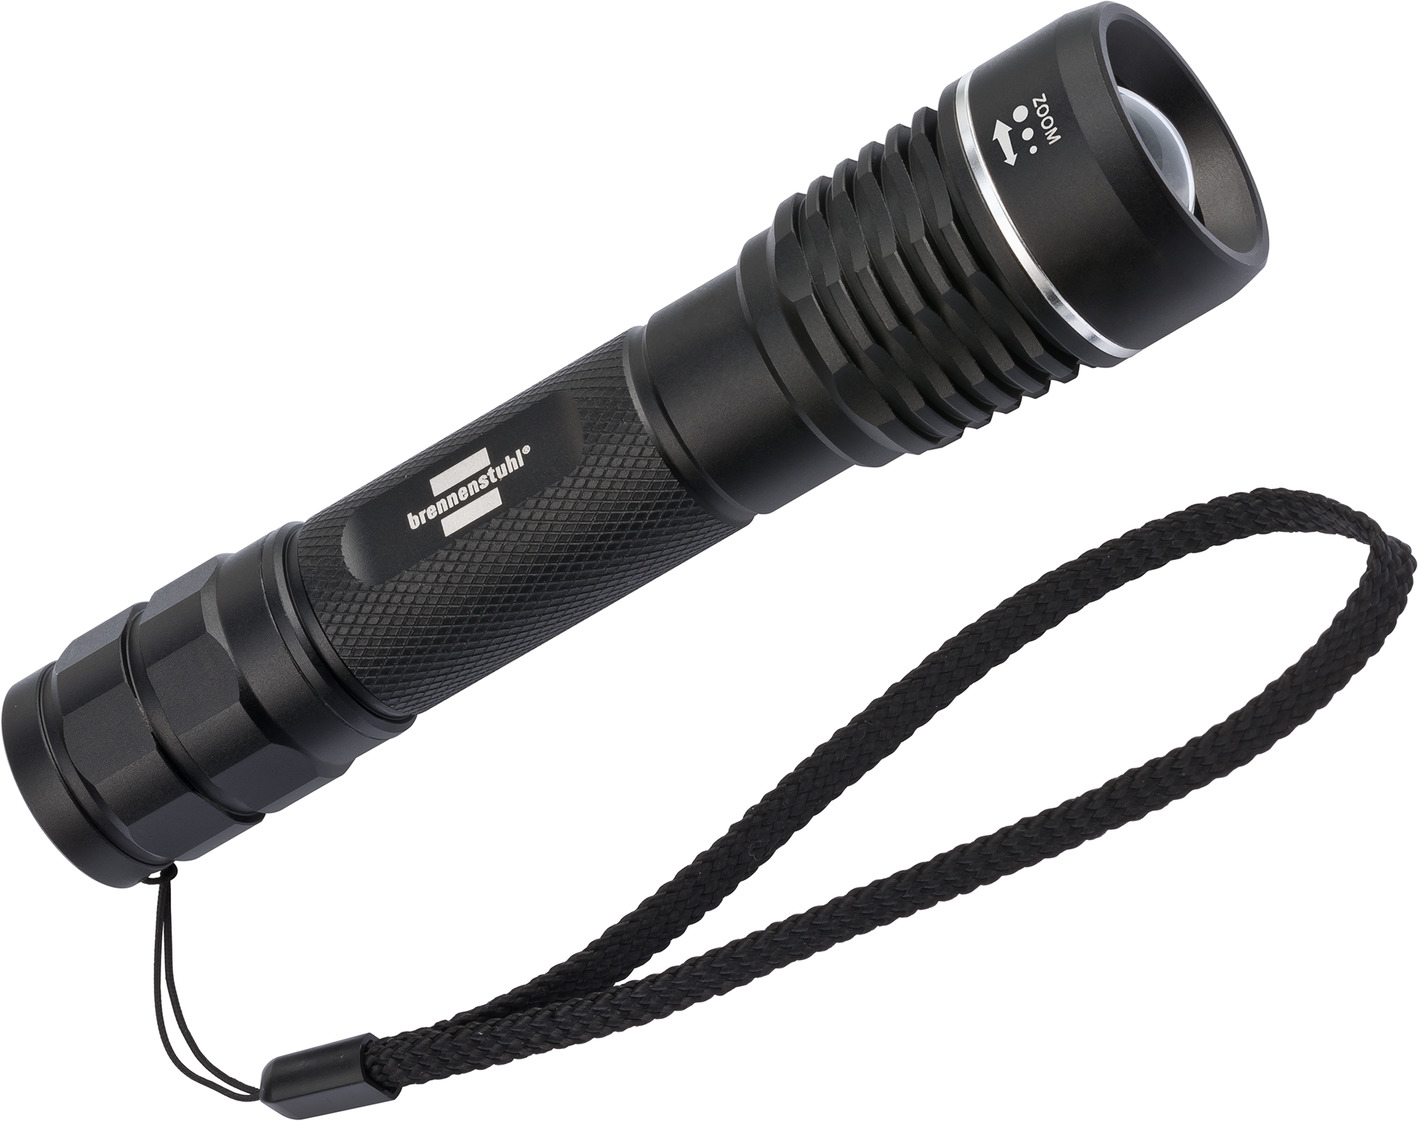 Arrela Ultra Bright Tactical Flashlight Portable Handheld LED Flashlight IP55 Water-Resistant Mini Zoomable Rechargeable Flashlights for Indoors and Outdoors Black 5 Light Modes